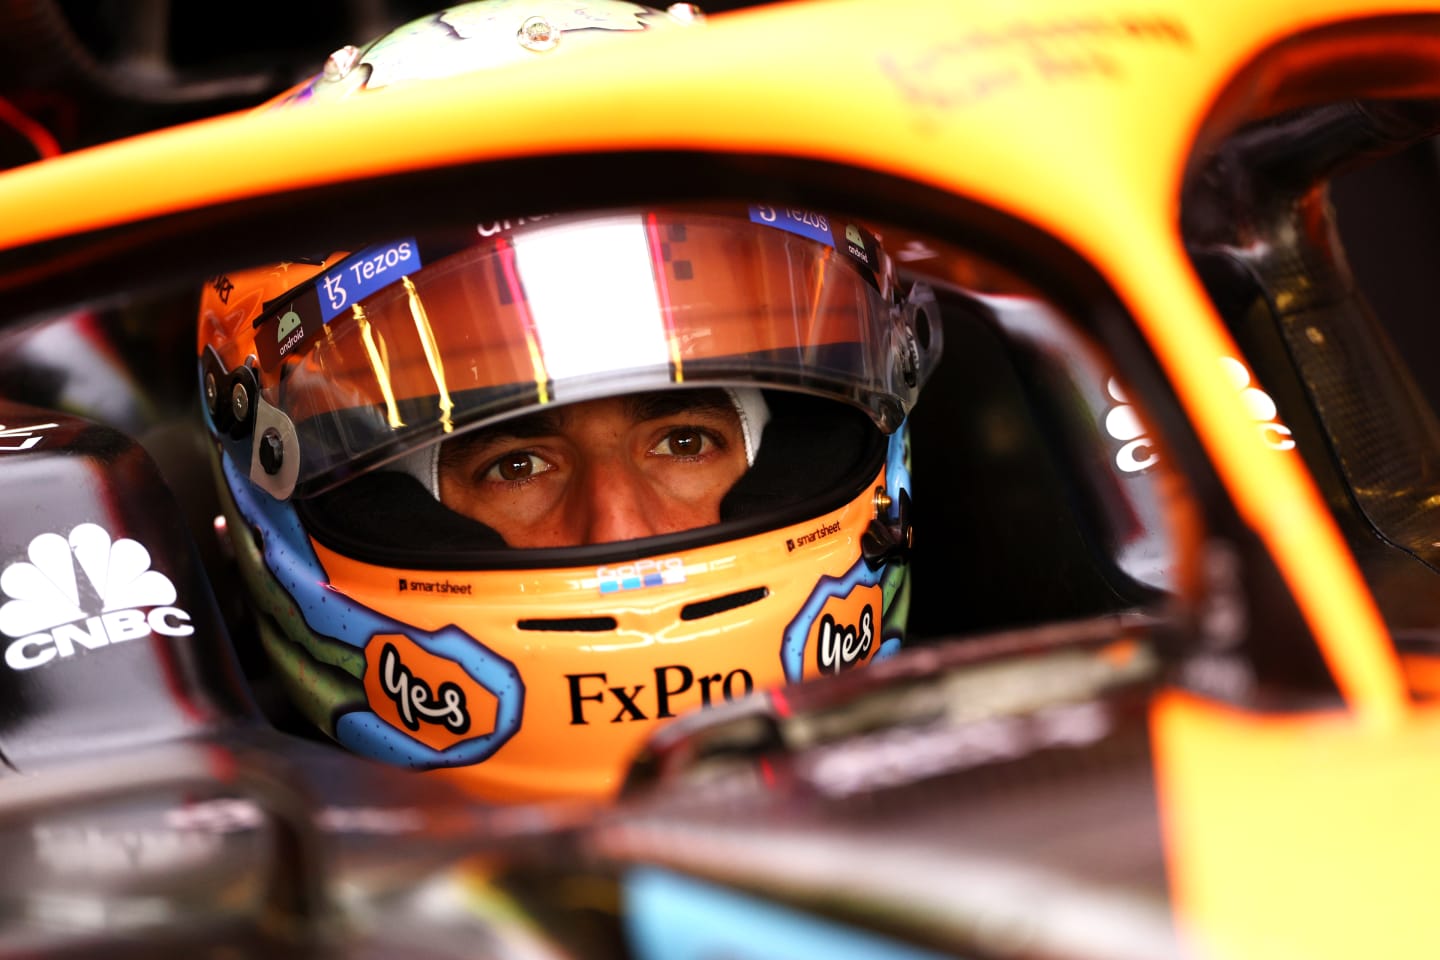 NORTHAMPTON, ENGLAND - JULY 01: Daniel Ricciardo of Australia and McLaren prepares to drive in the garage during practice ahead of the F1 Grand Prix of Great Britain at Silverstone on July 01, 2022 in Northampton, England. (Photo by Clive Rose/Getty Images)